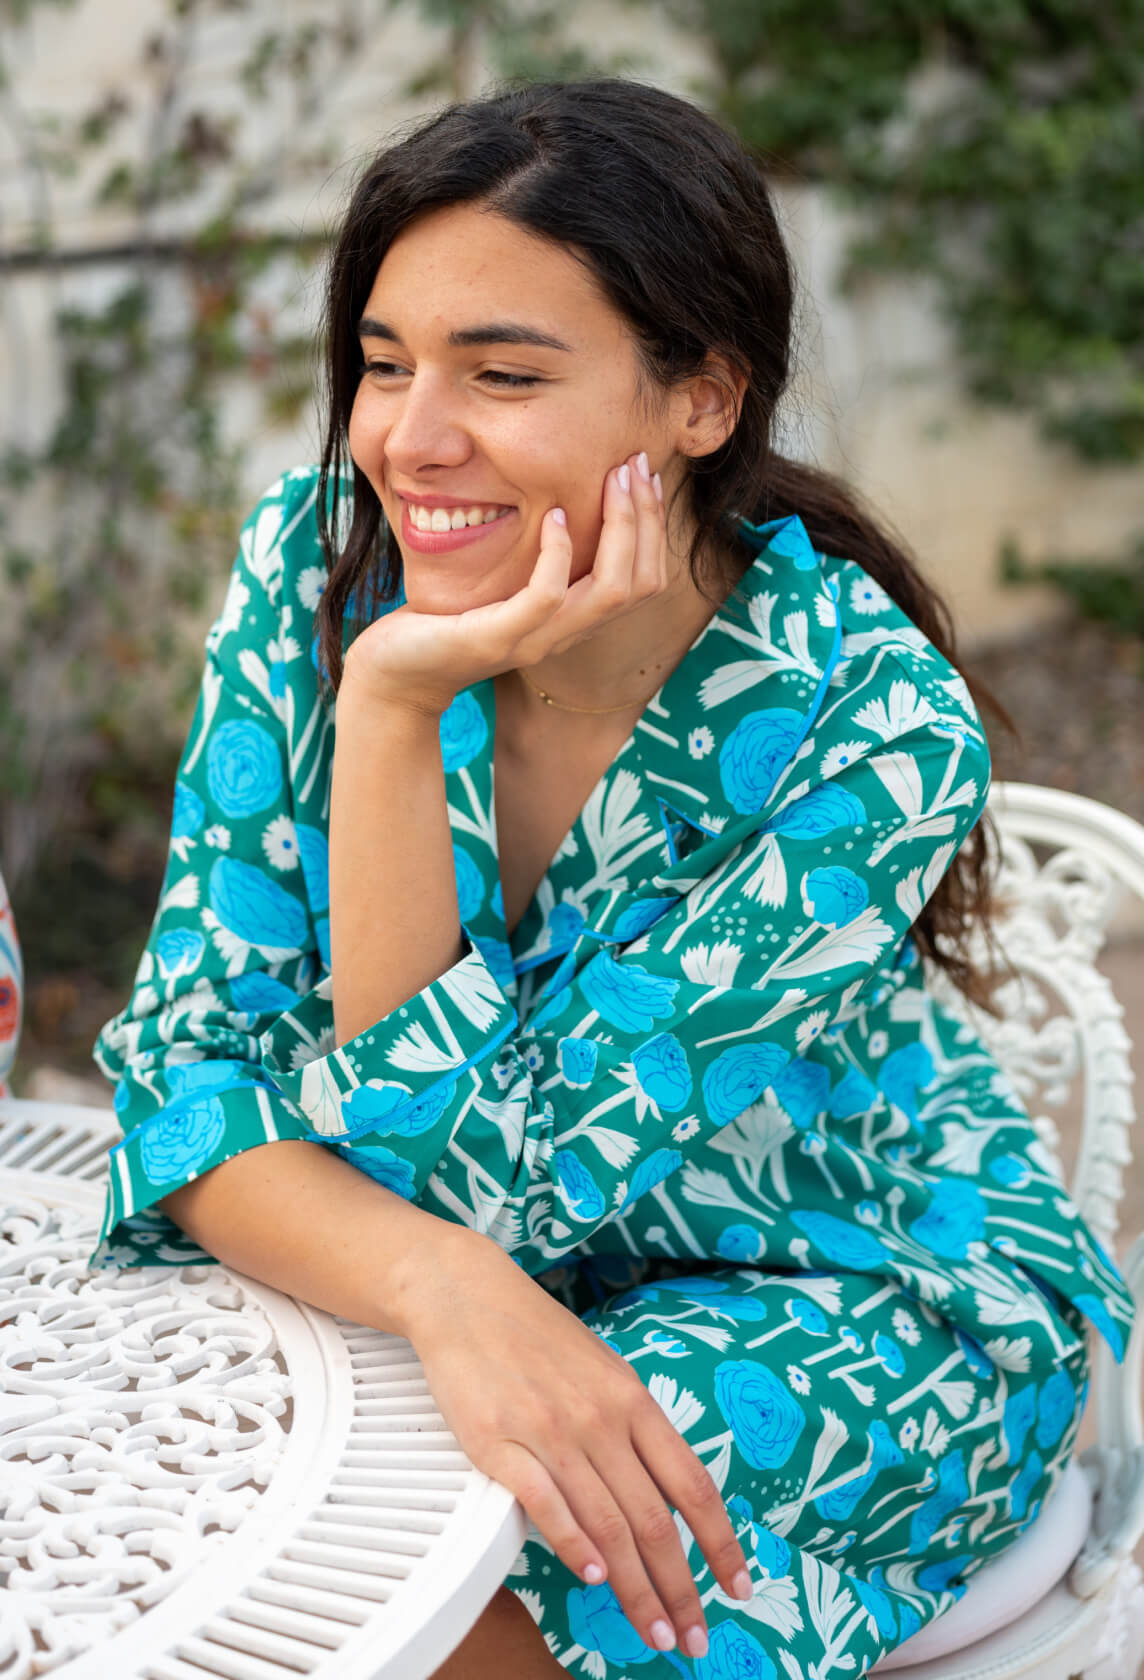 female wearing matching pajama set with green and blue floral print sitting by a white table